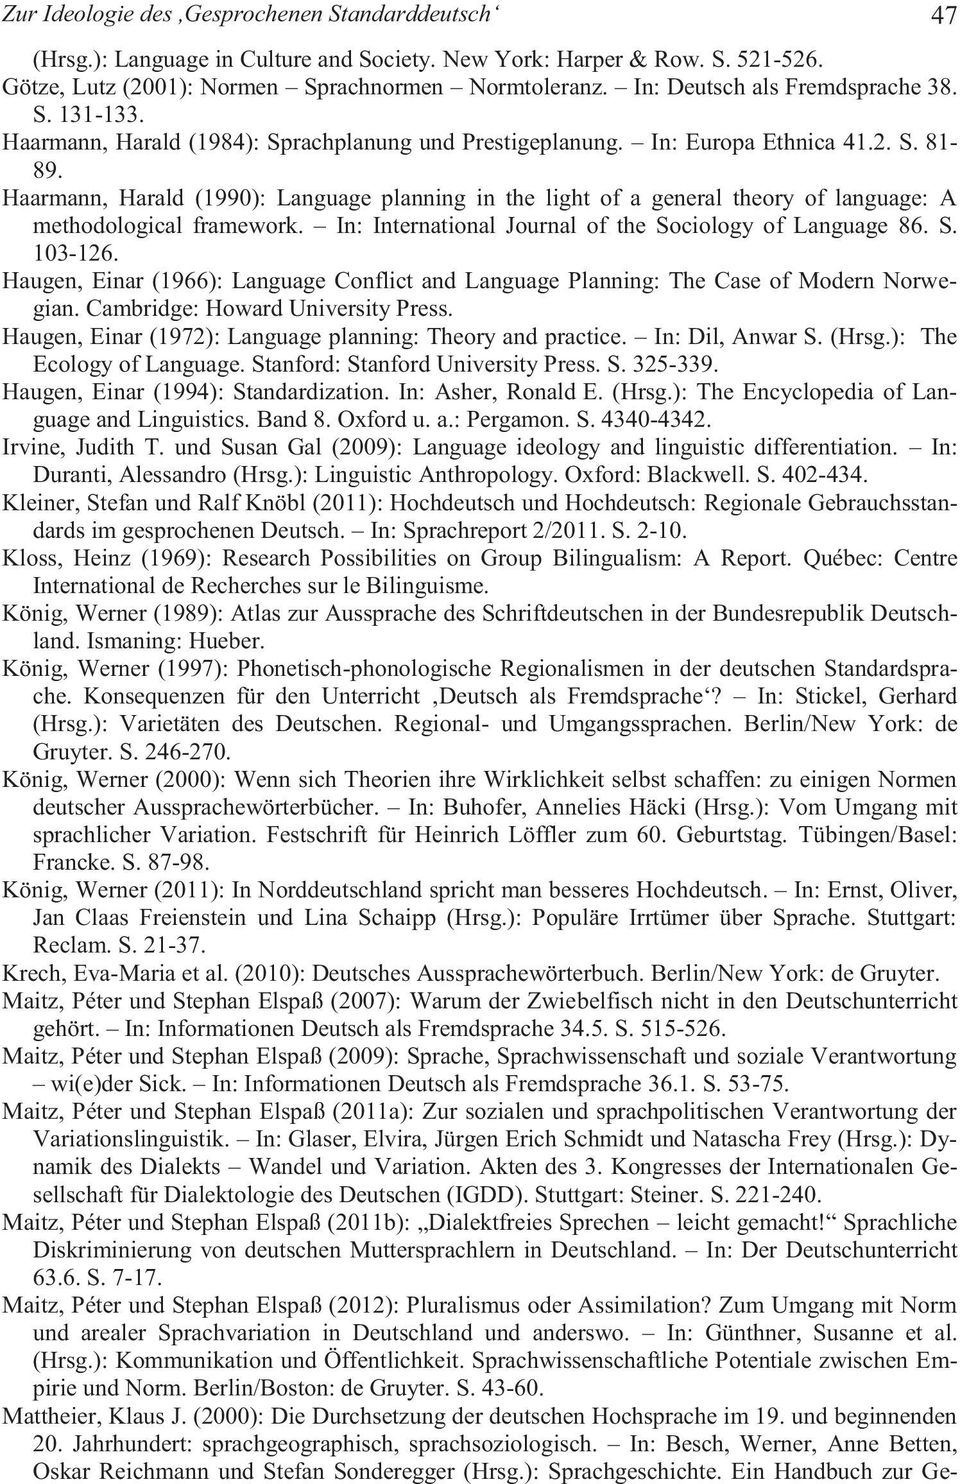 Haarmann, Harald (1990): Language planning in the light of a general theory of language: A methodological framework. In: International Journal of the Sociology of Language 86. S. 103-126.